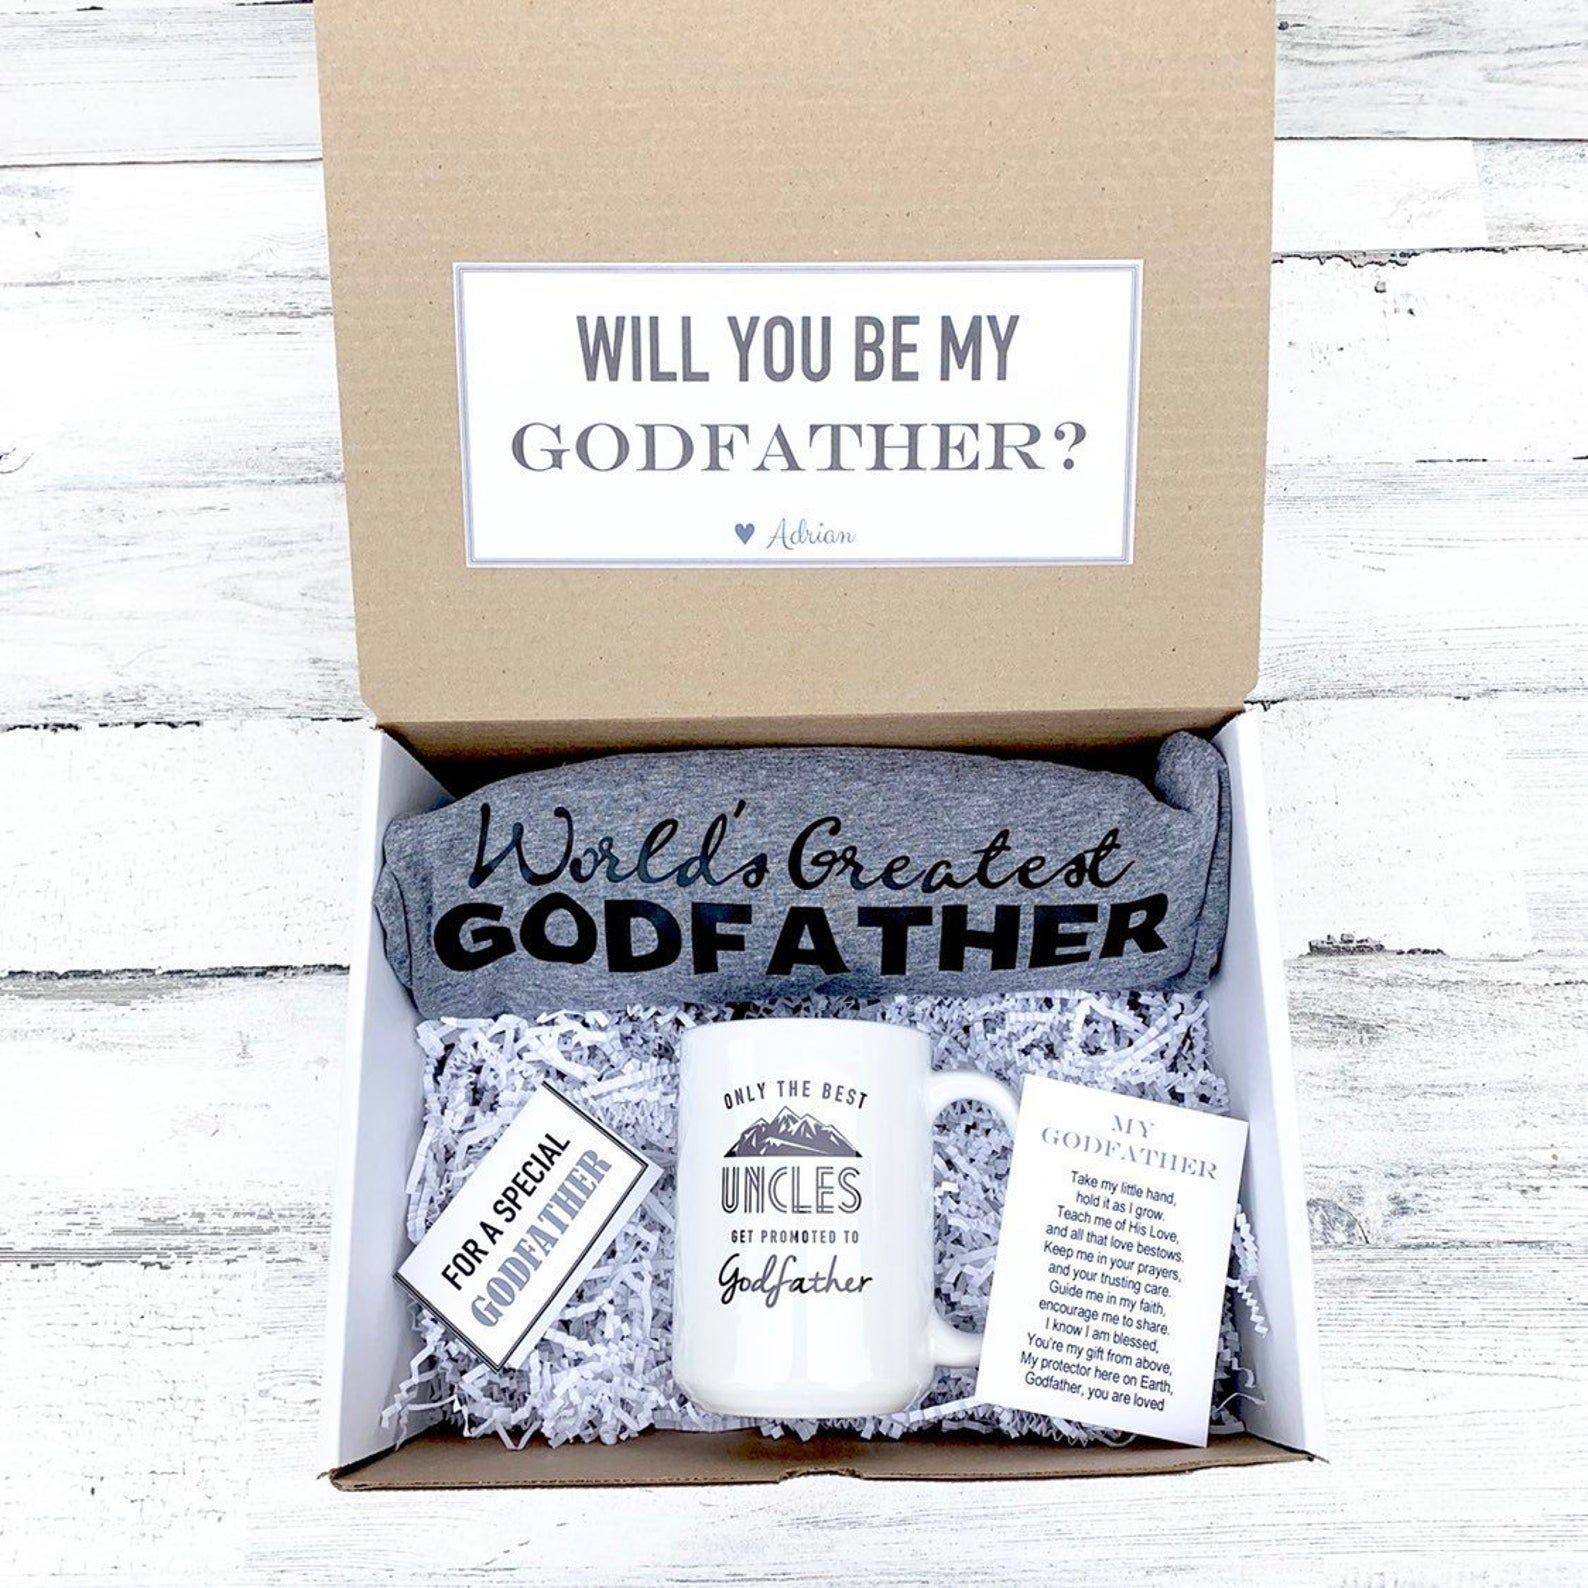 20 Best Godfather Gifts 2021 - Personalized Gifts for a Godfather